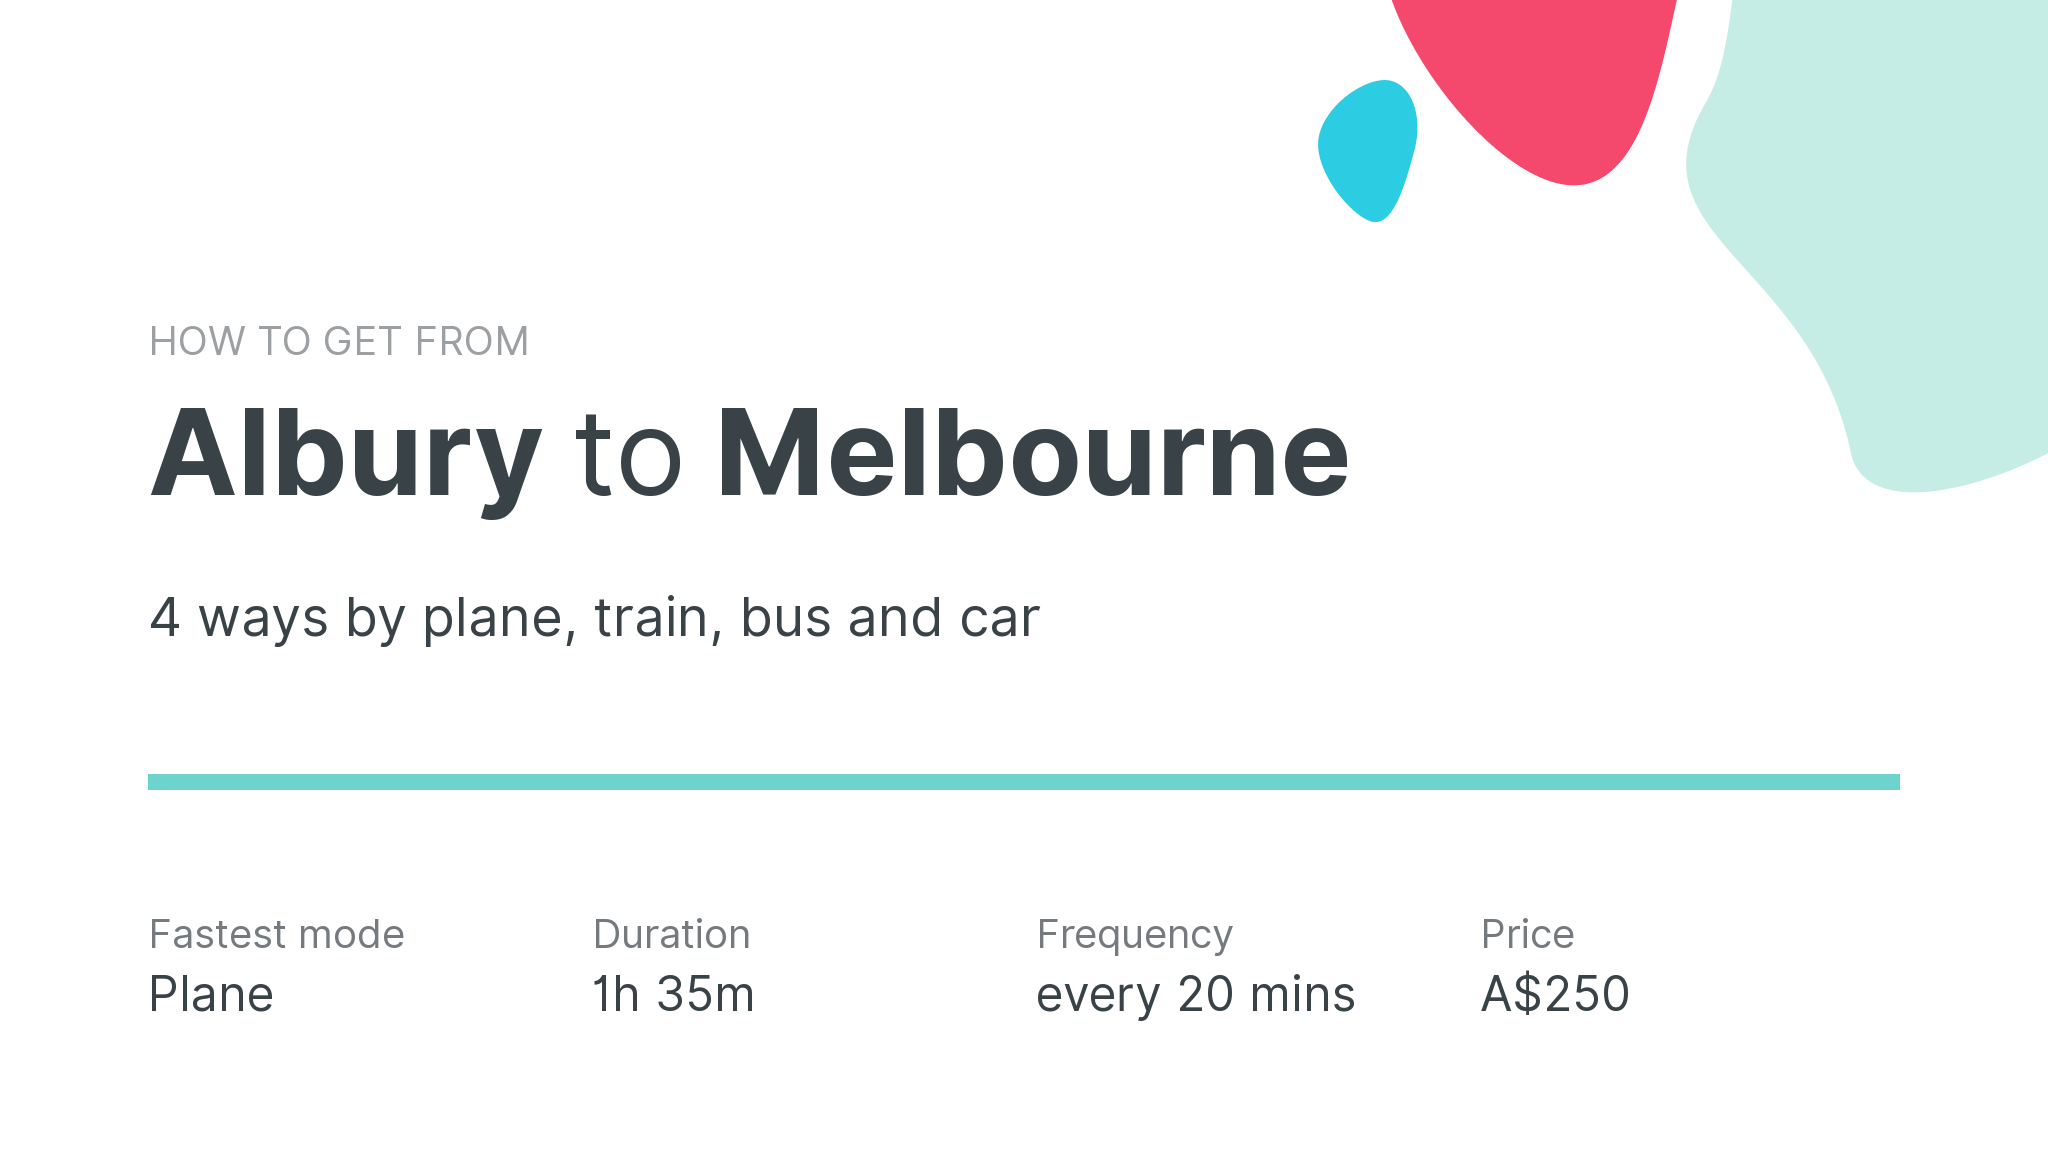 How do I get from Albury to Melbourne